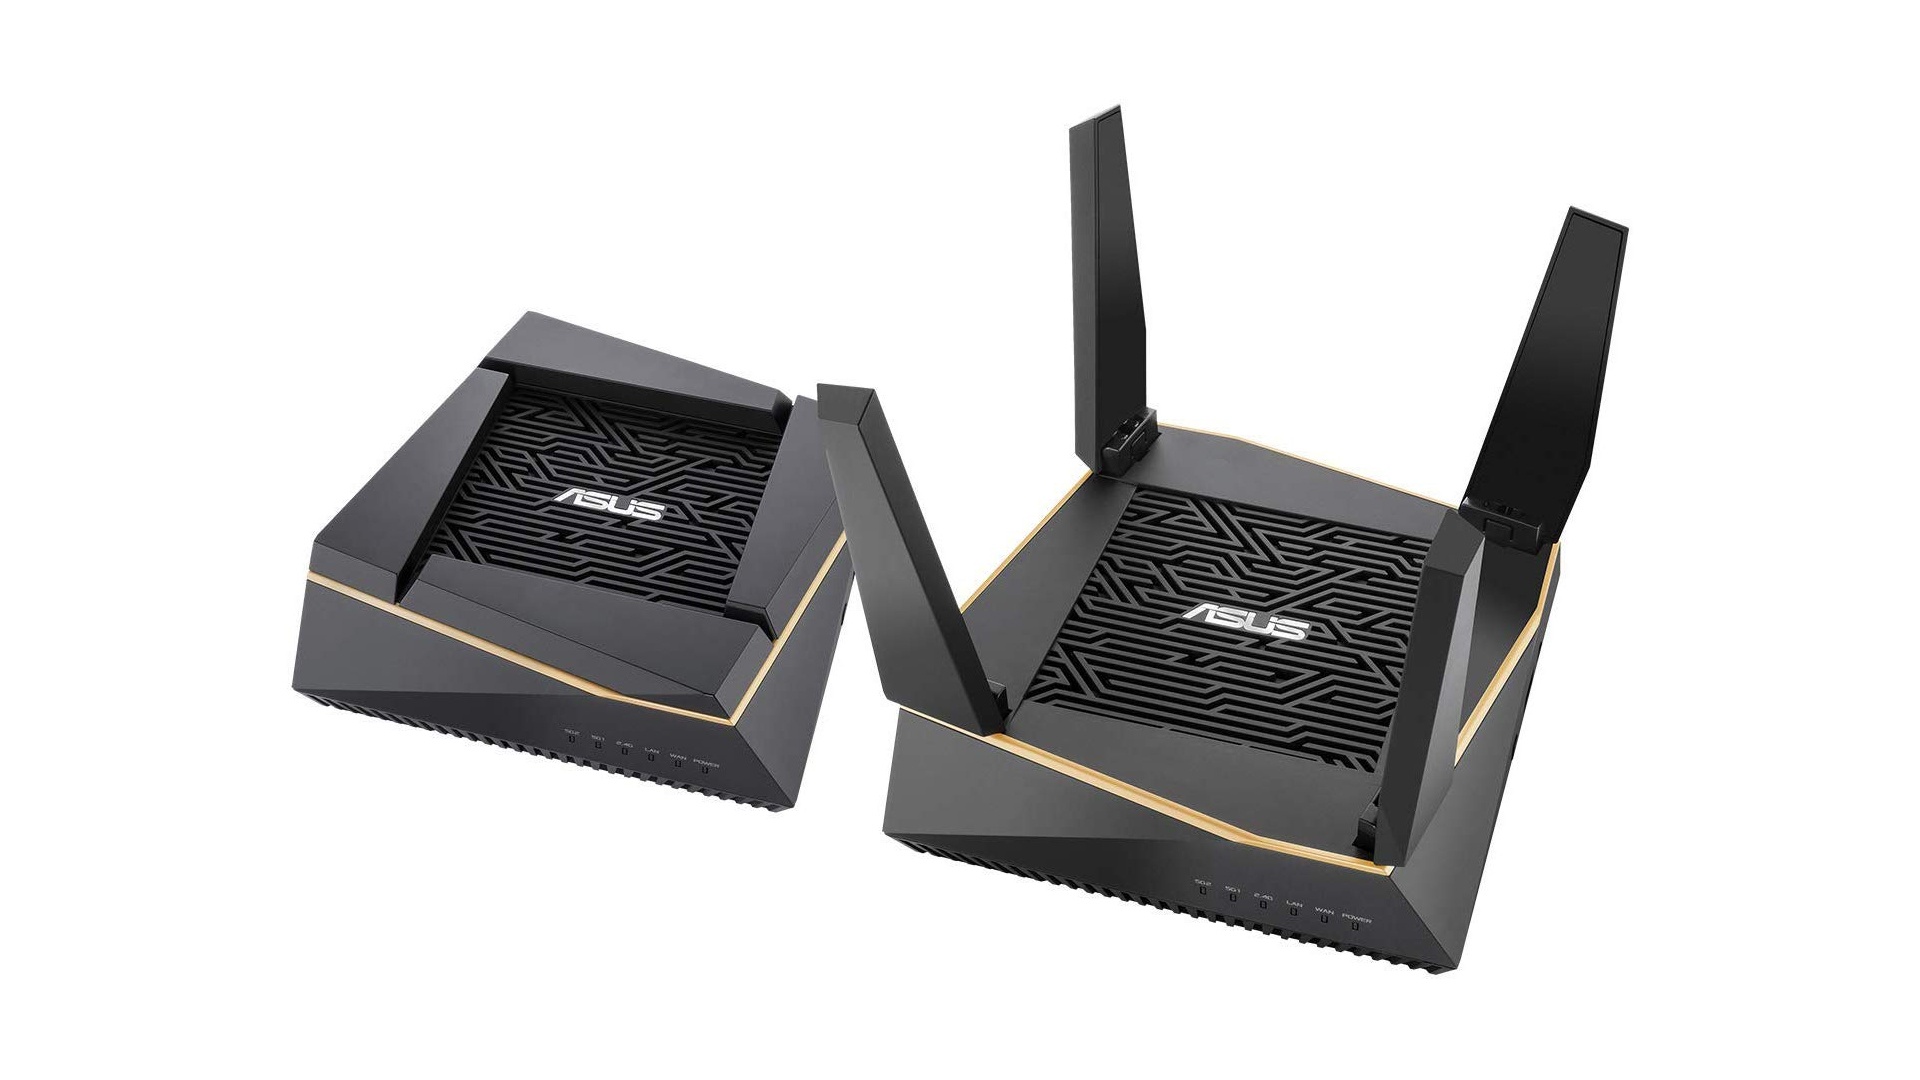 Two Asus RT-AX92U routers at an angle on a white background